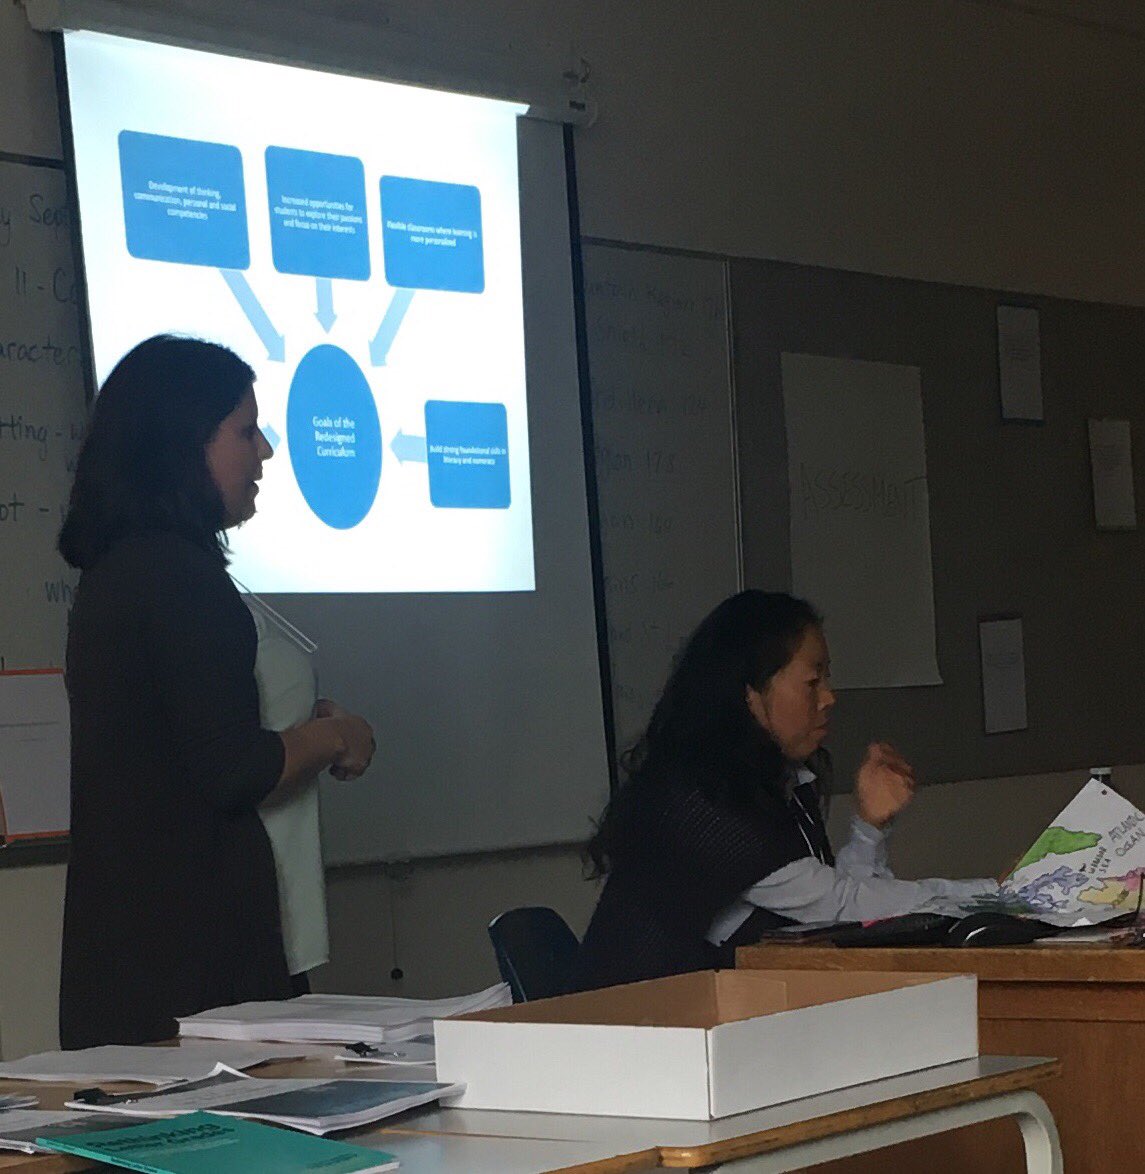 @tltrieu @SoniaMaglio1 sharing their experience and expertise. Helping us to improve how we communicate student learning. #newwestlearns #sd40ciday